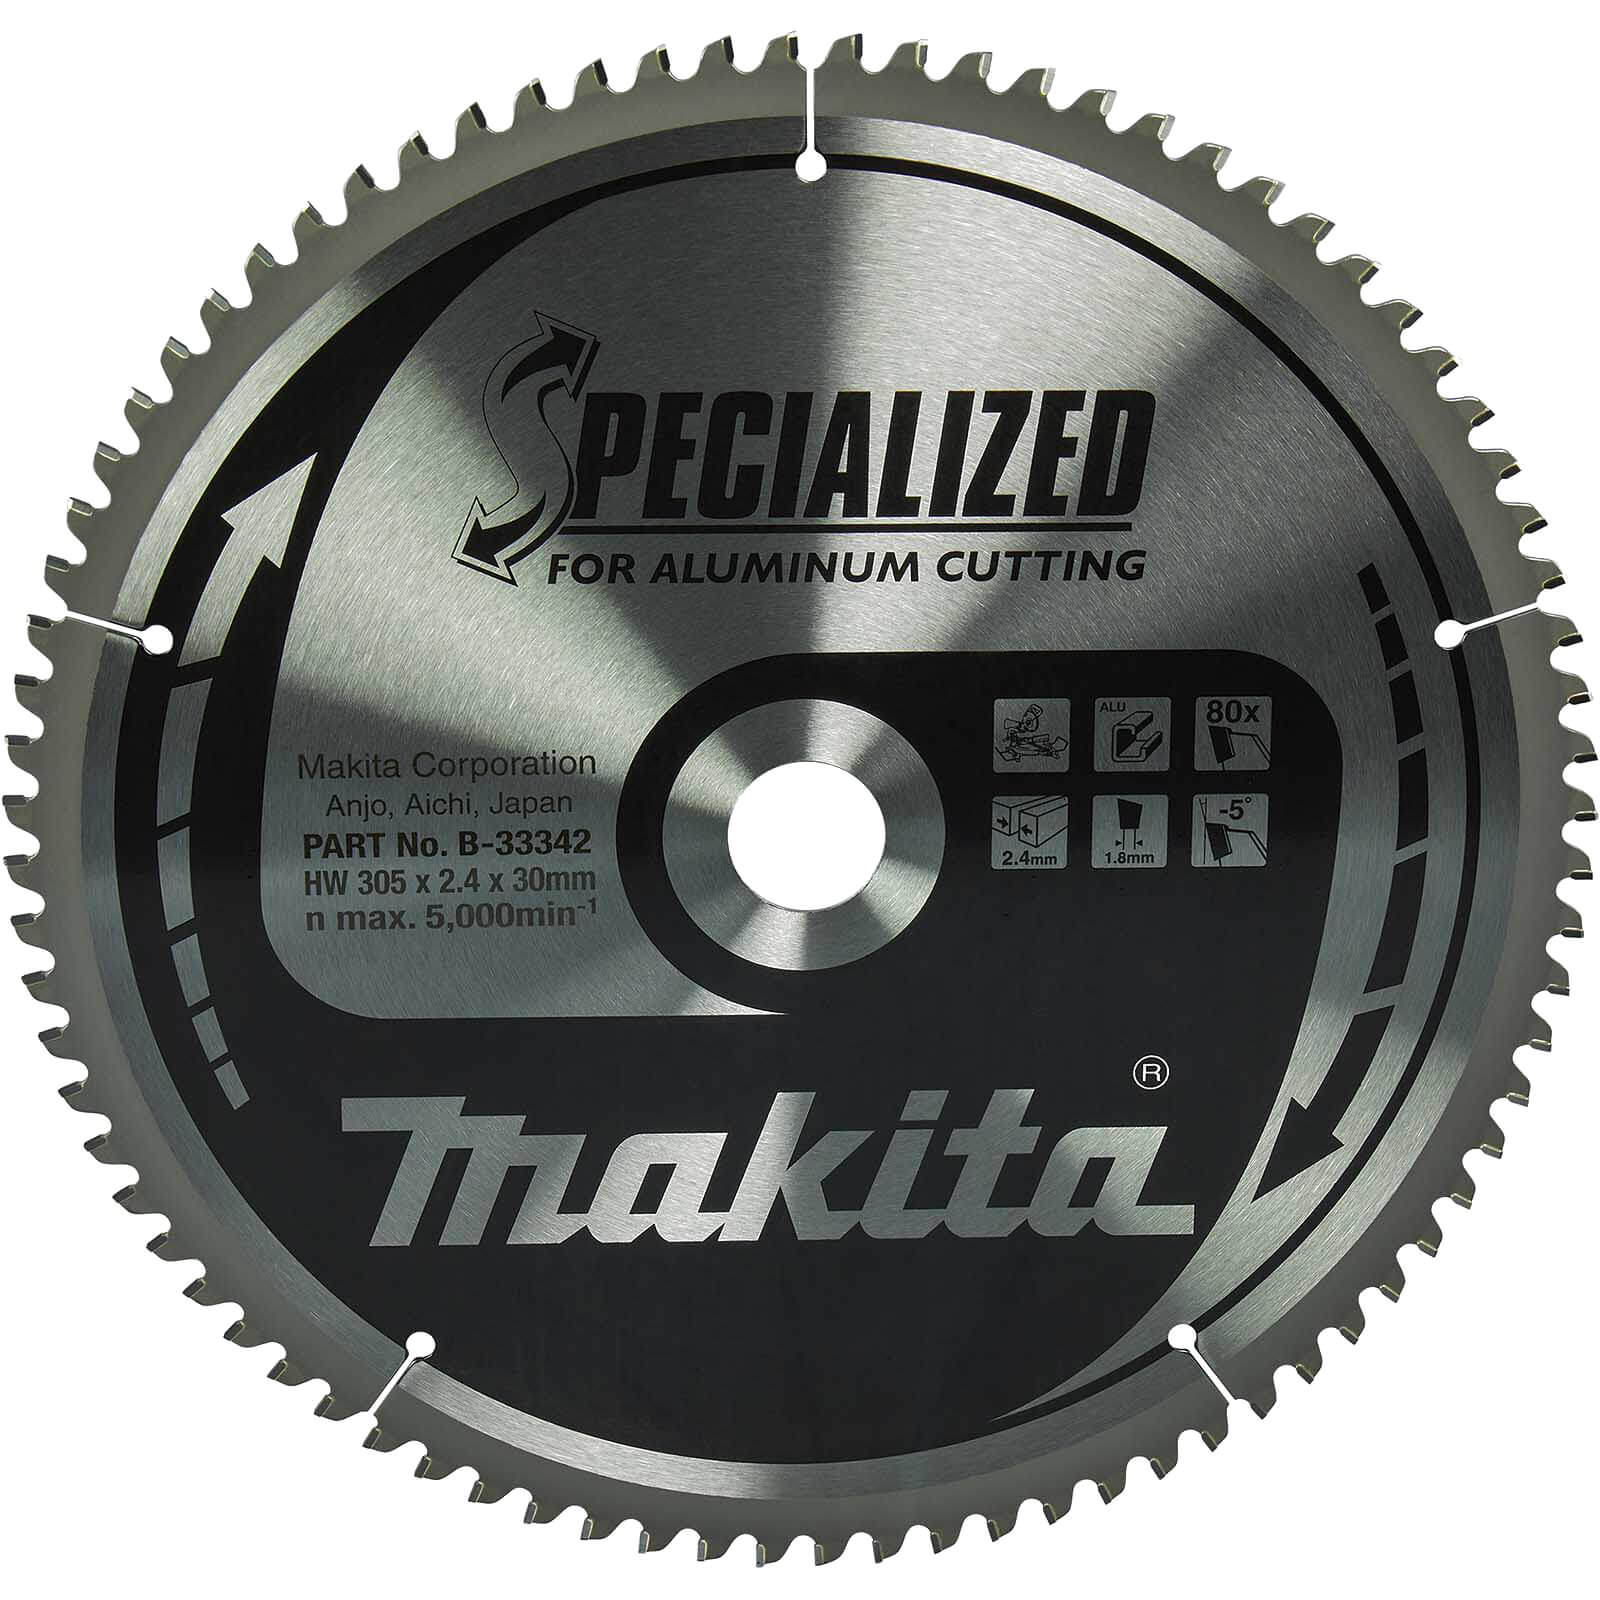 Photos - Power Tool Accessory Makita SPECIALIZED Circular Saw Blade for Aluminium Cutting 305mm 80T 30mm 